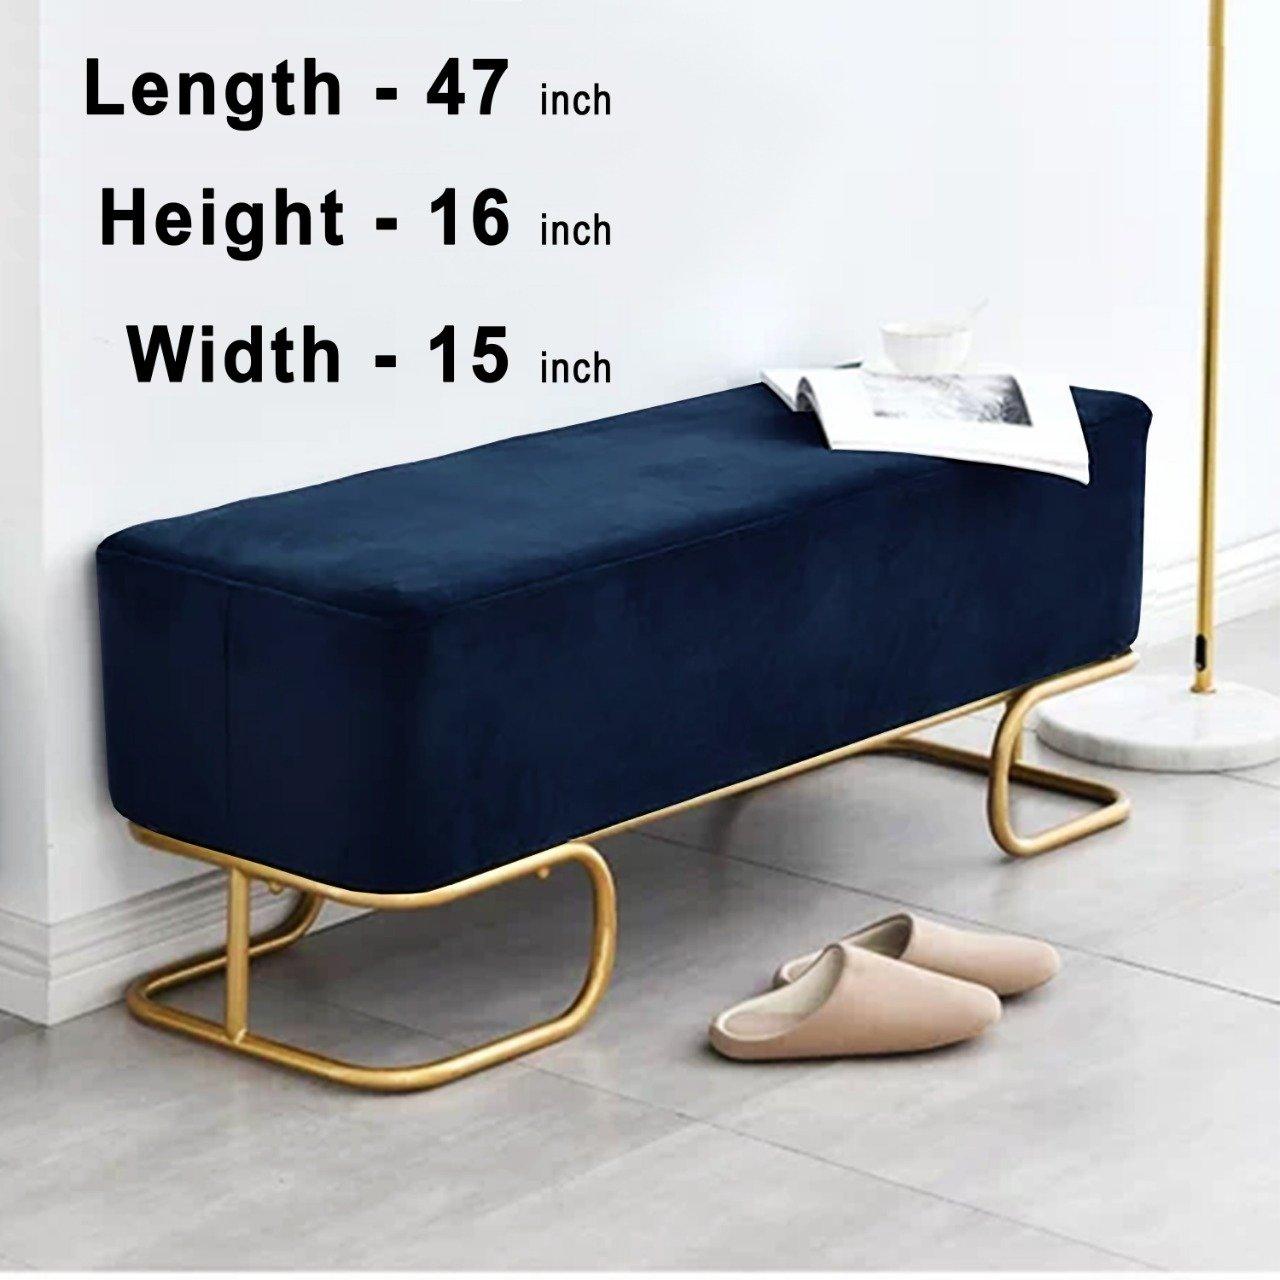 Luxury Wooden stool 3 Seater With Steel Stand -324 - 92Bedding